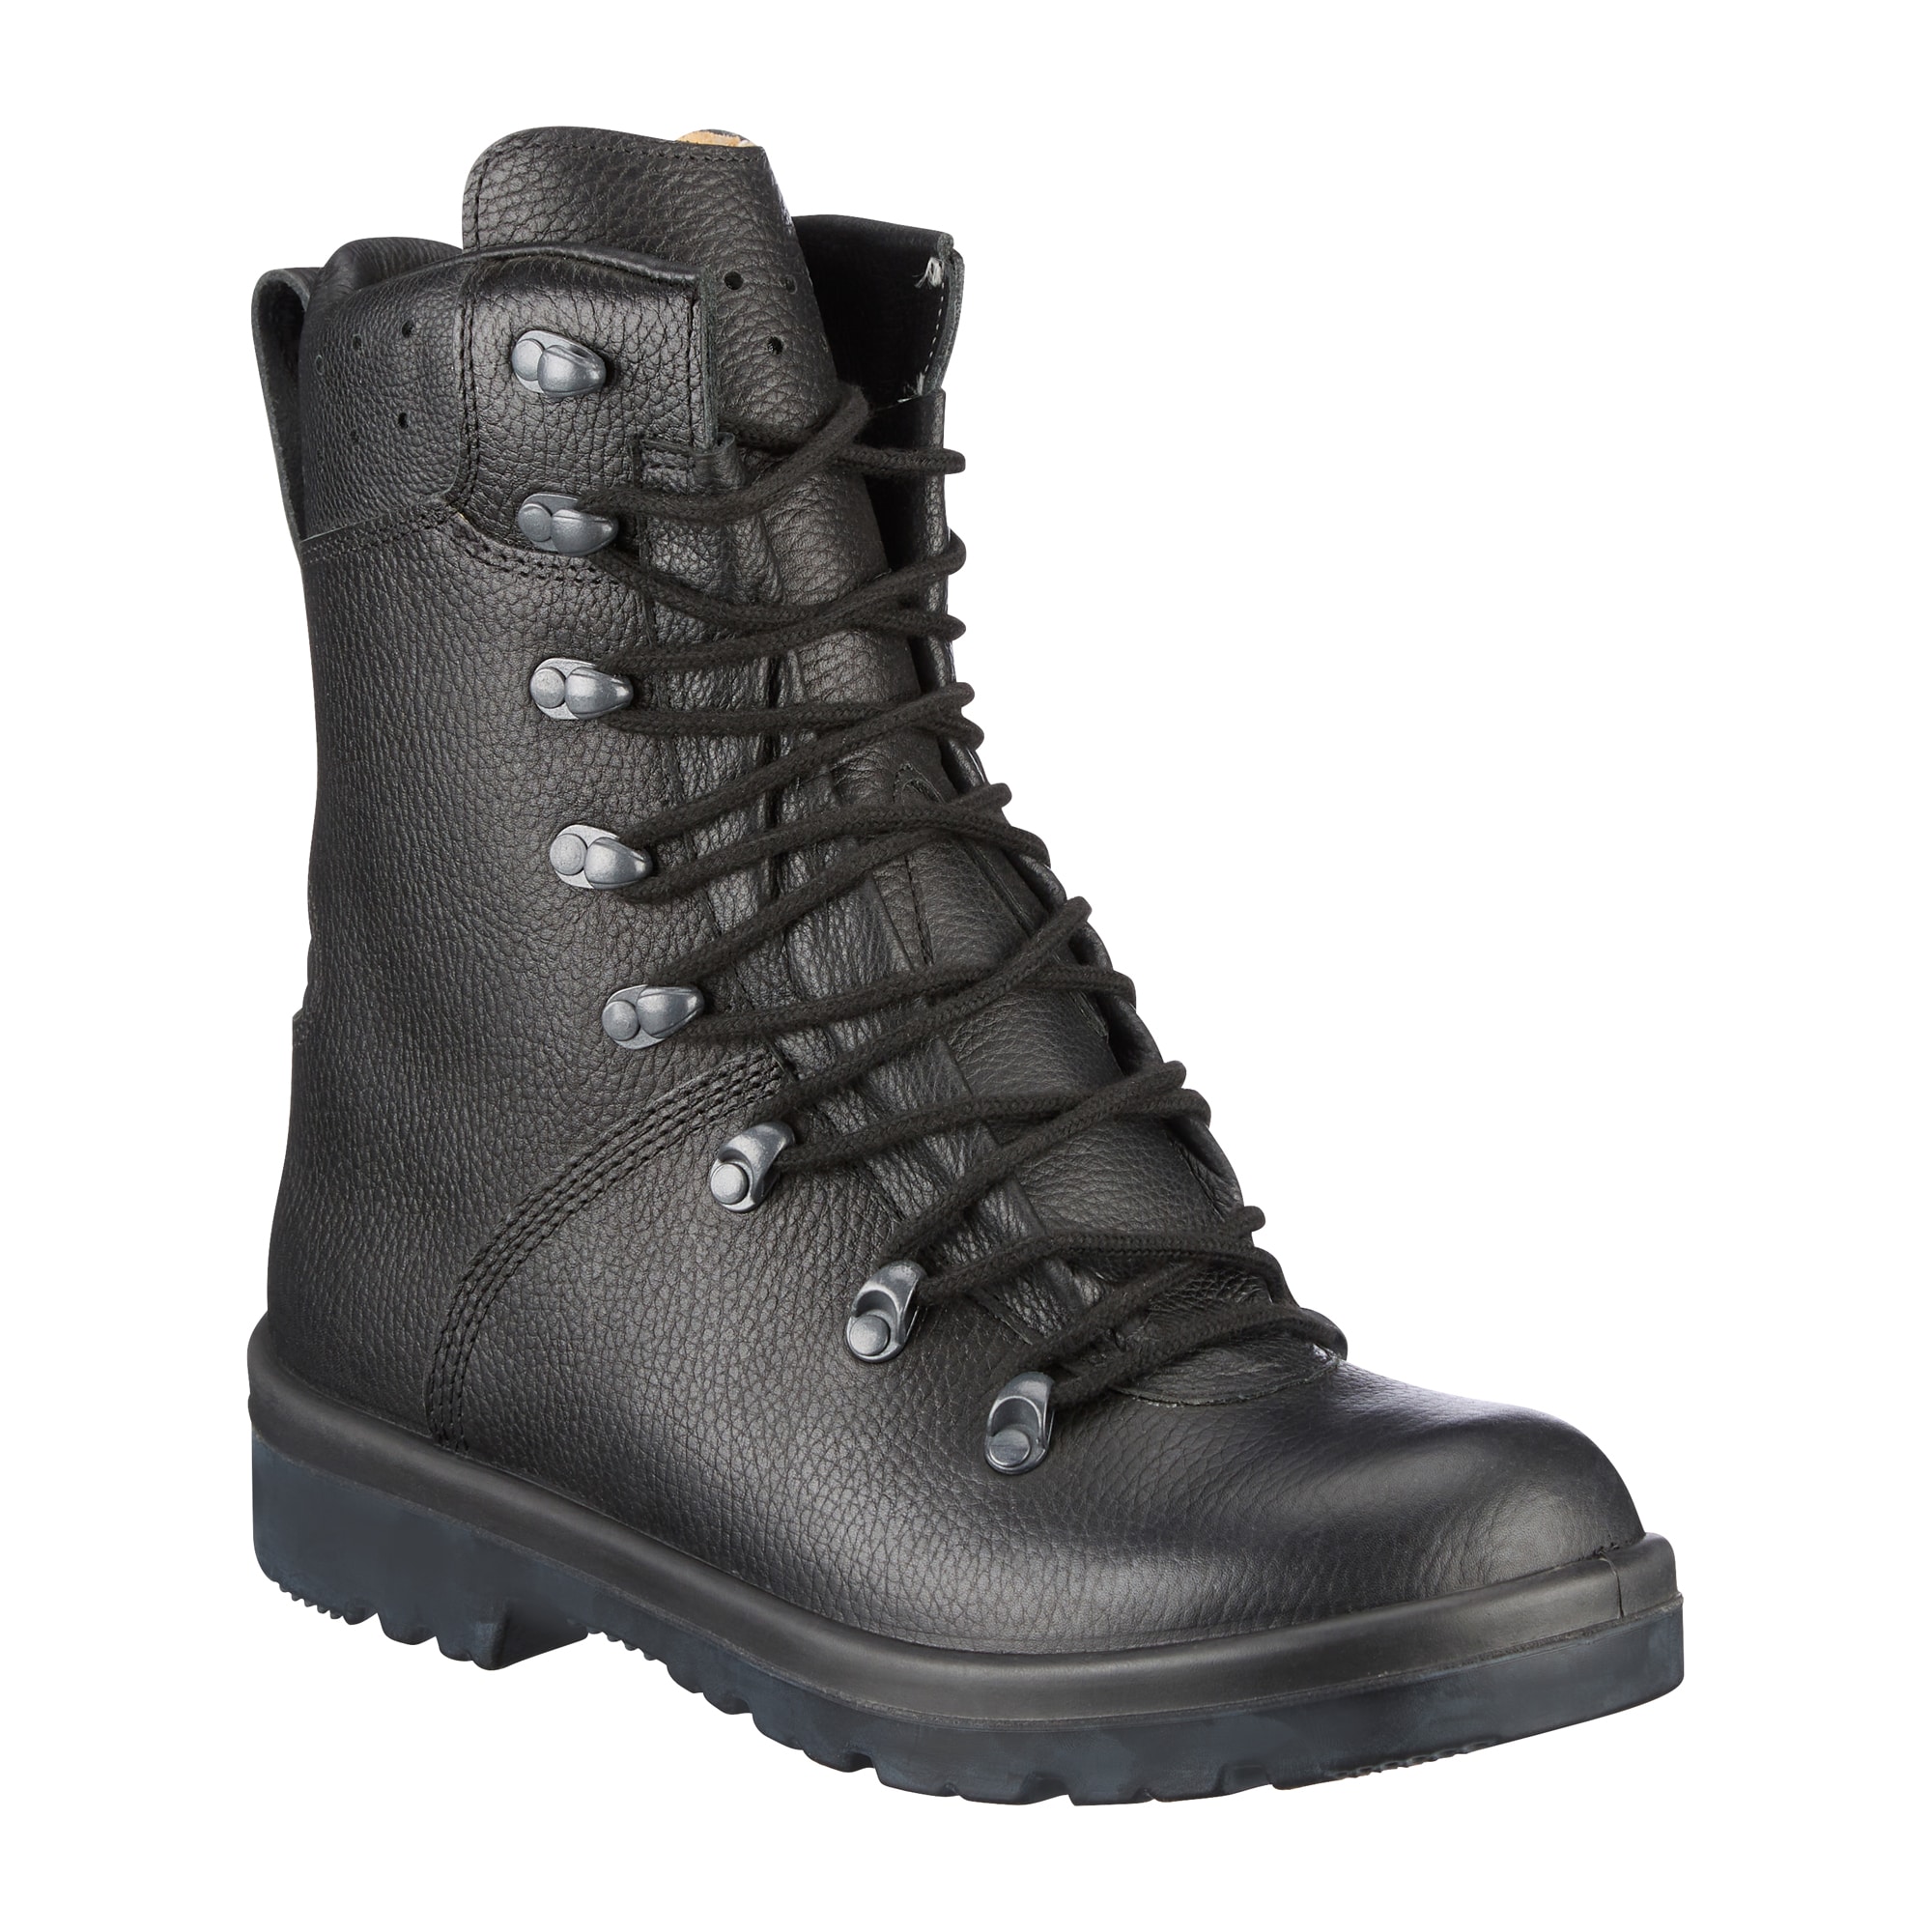 Purchase the BW Combat Boots Model 2007 